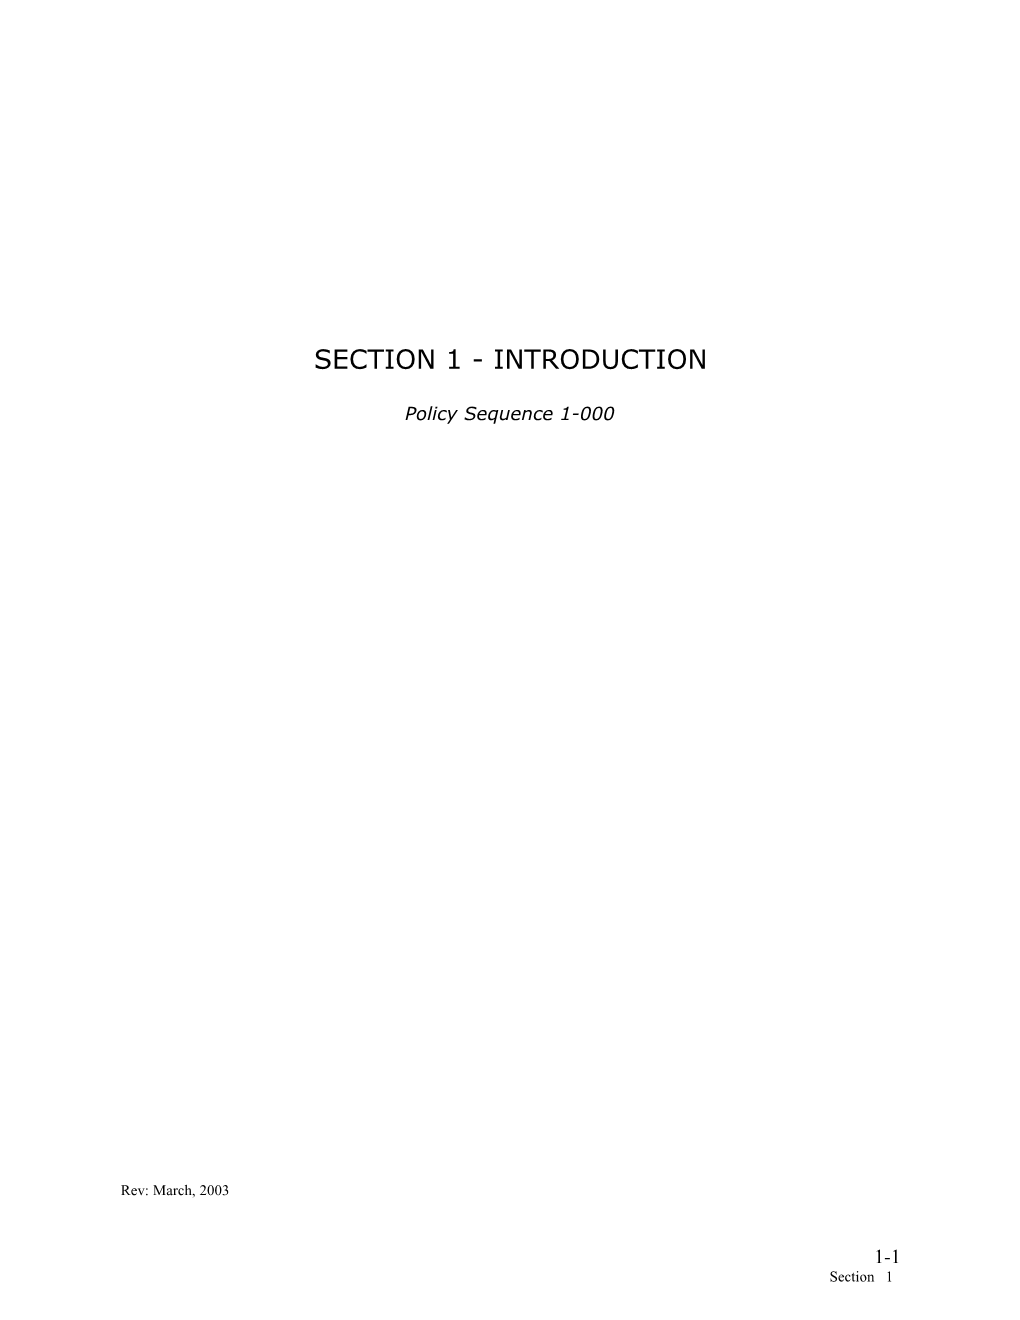 Project Director's Manual